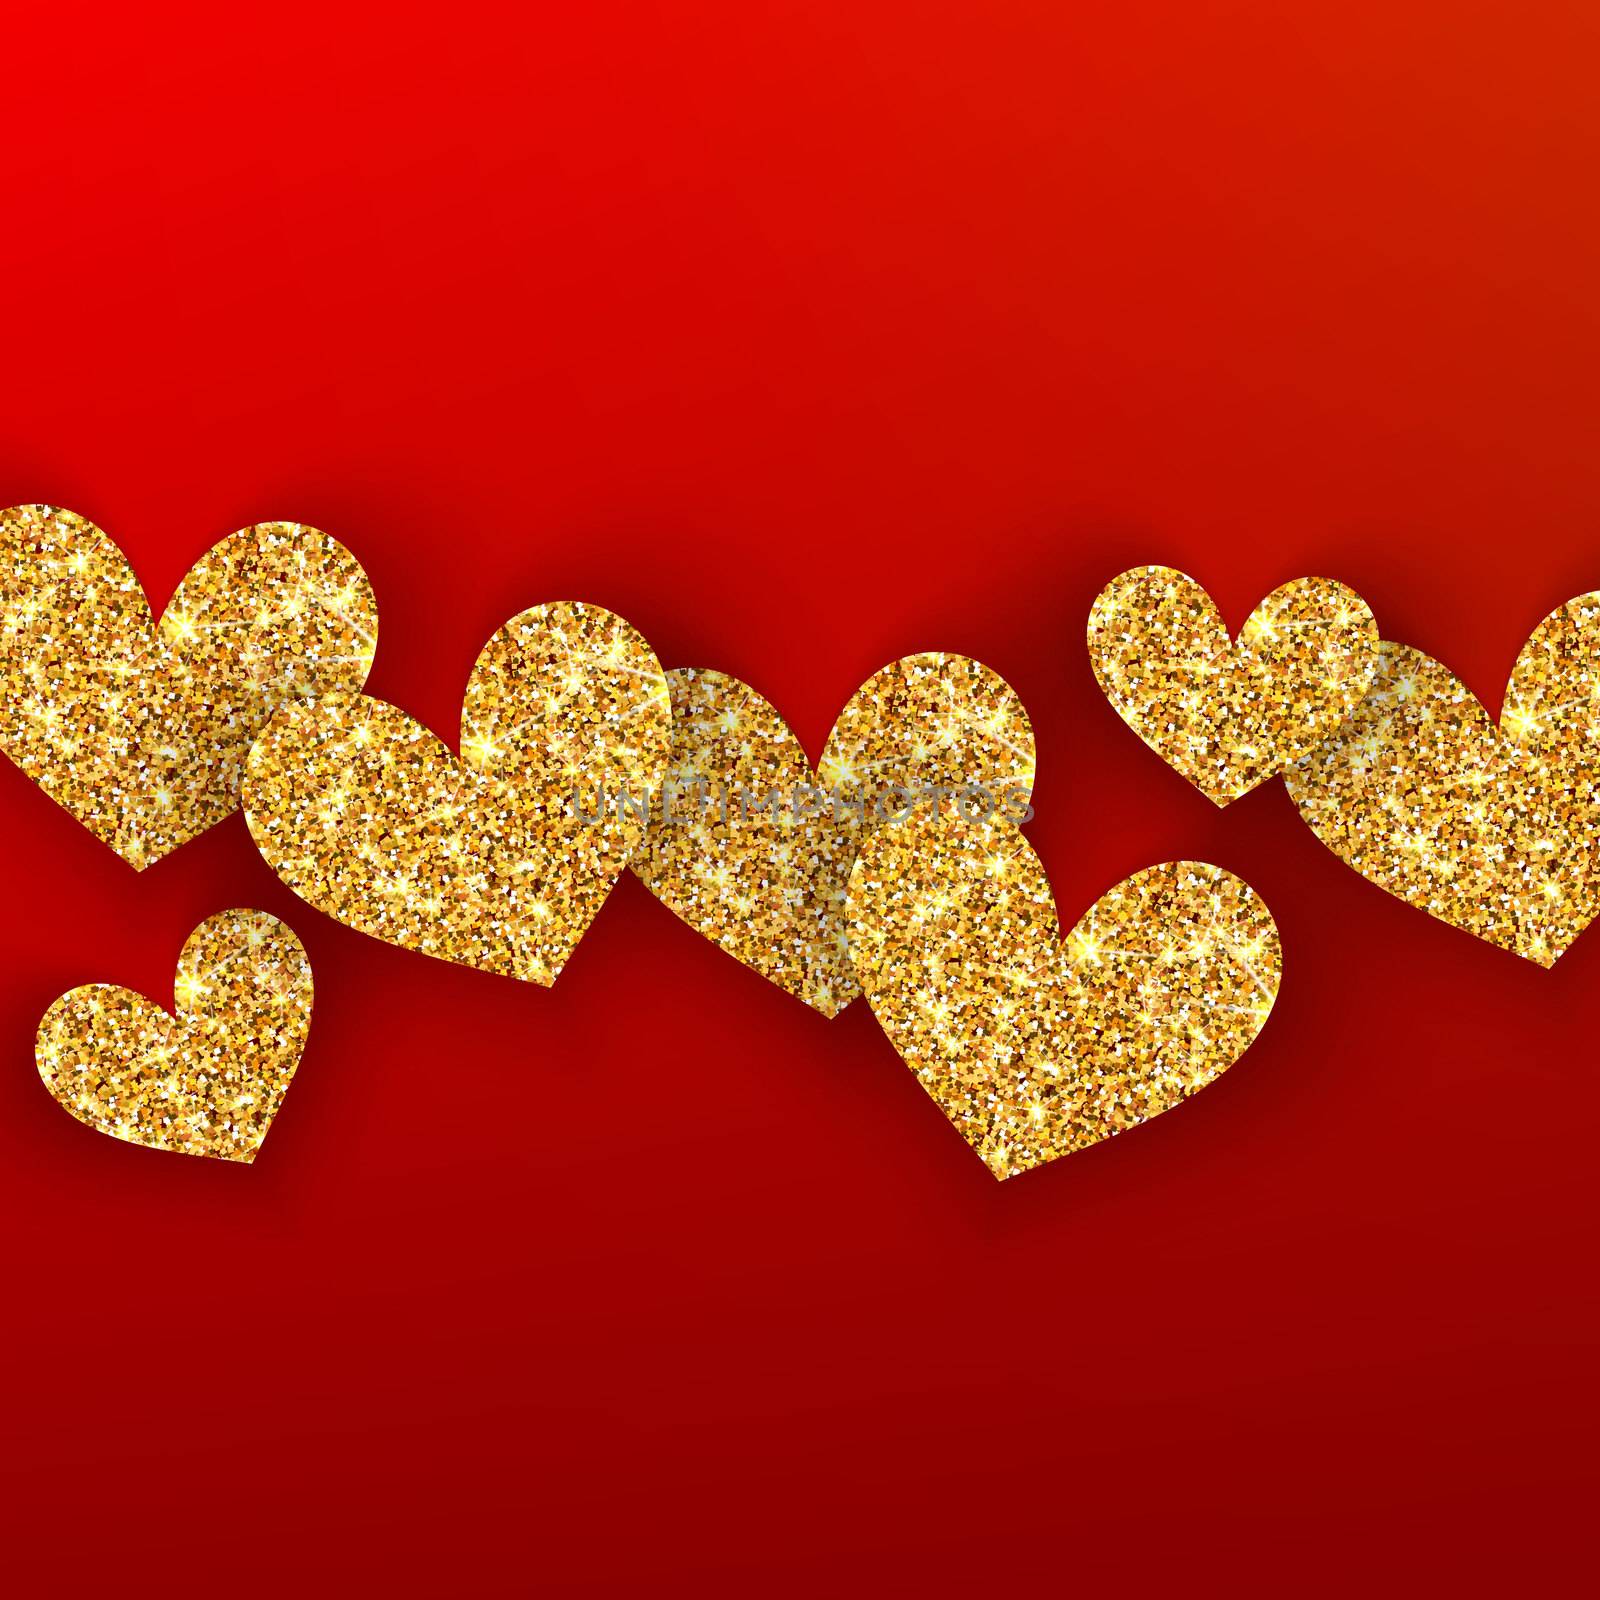 Realistic golden hearts on red background. Happy Valentines Day concept for greating card. Romantic Valentine gold hearts. by Elena_Garder